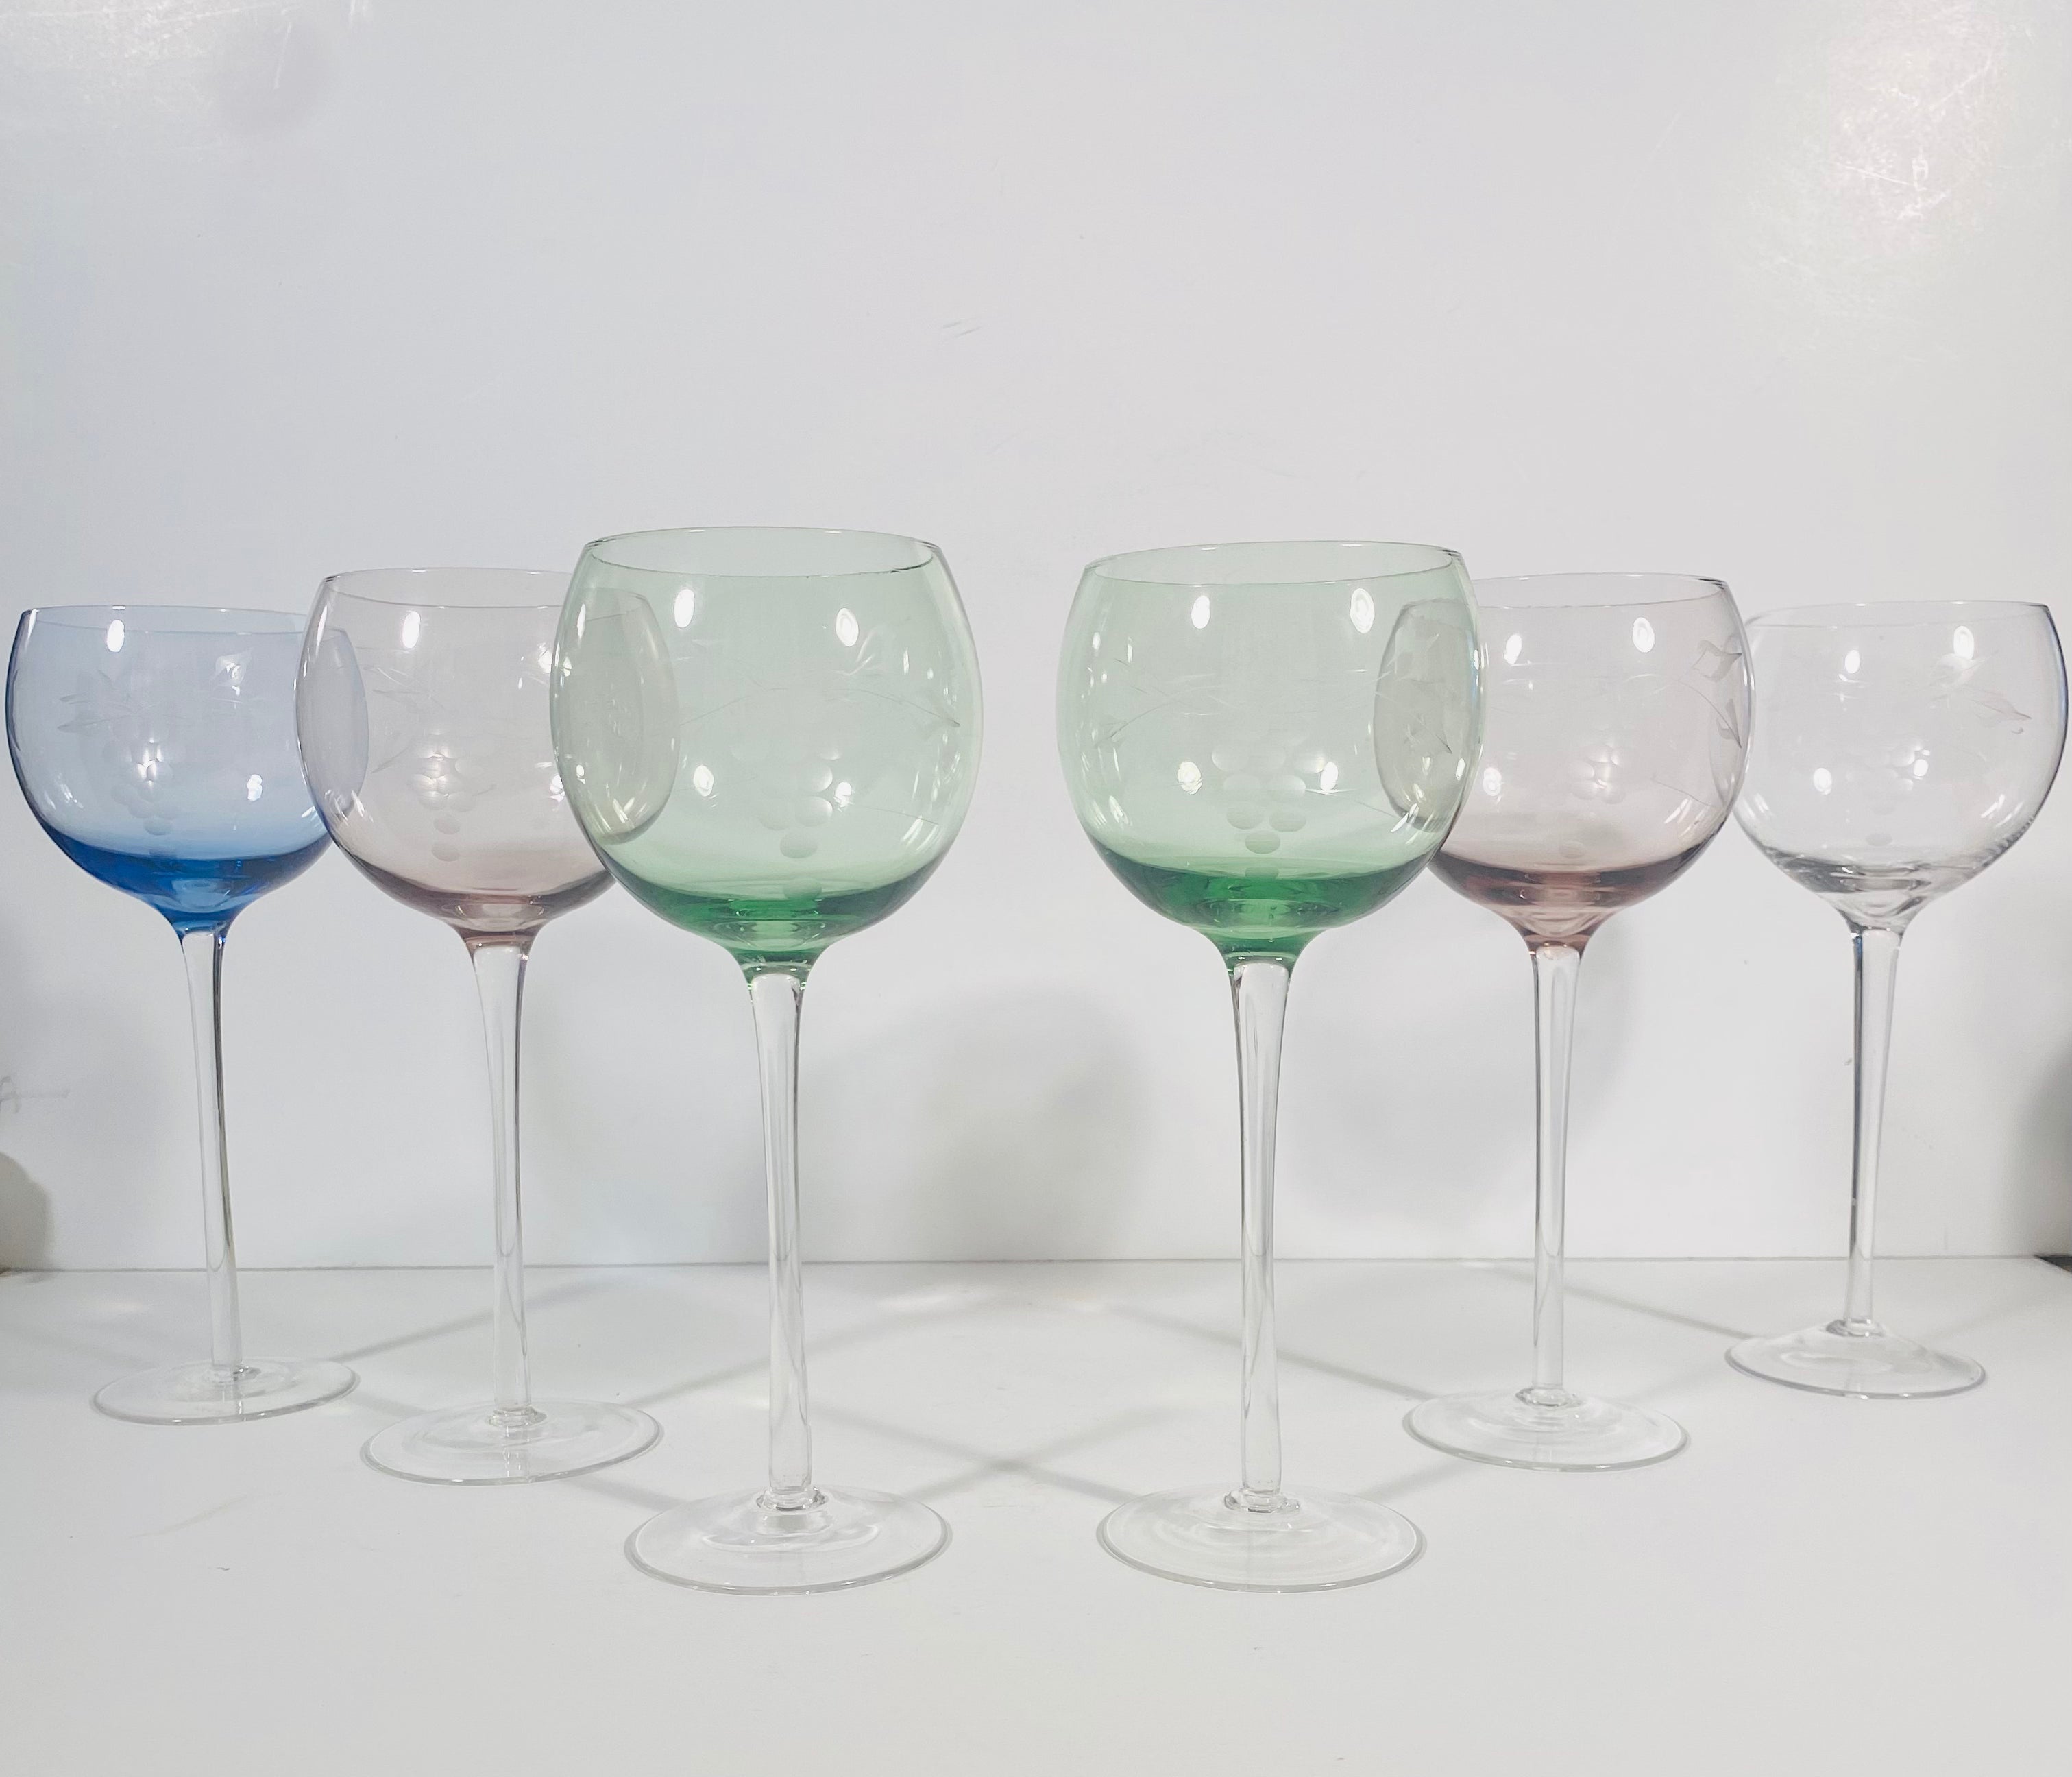 Vintage Colored Balloon Wine Glasses with Etched Glass Detail - Set of 8